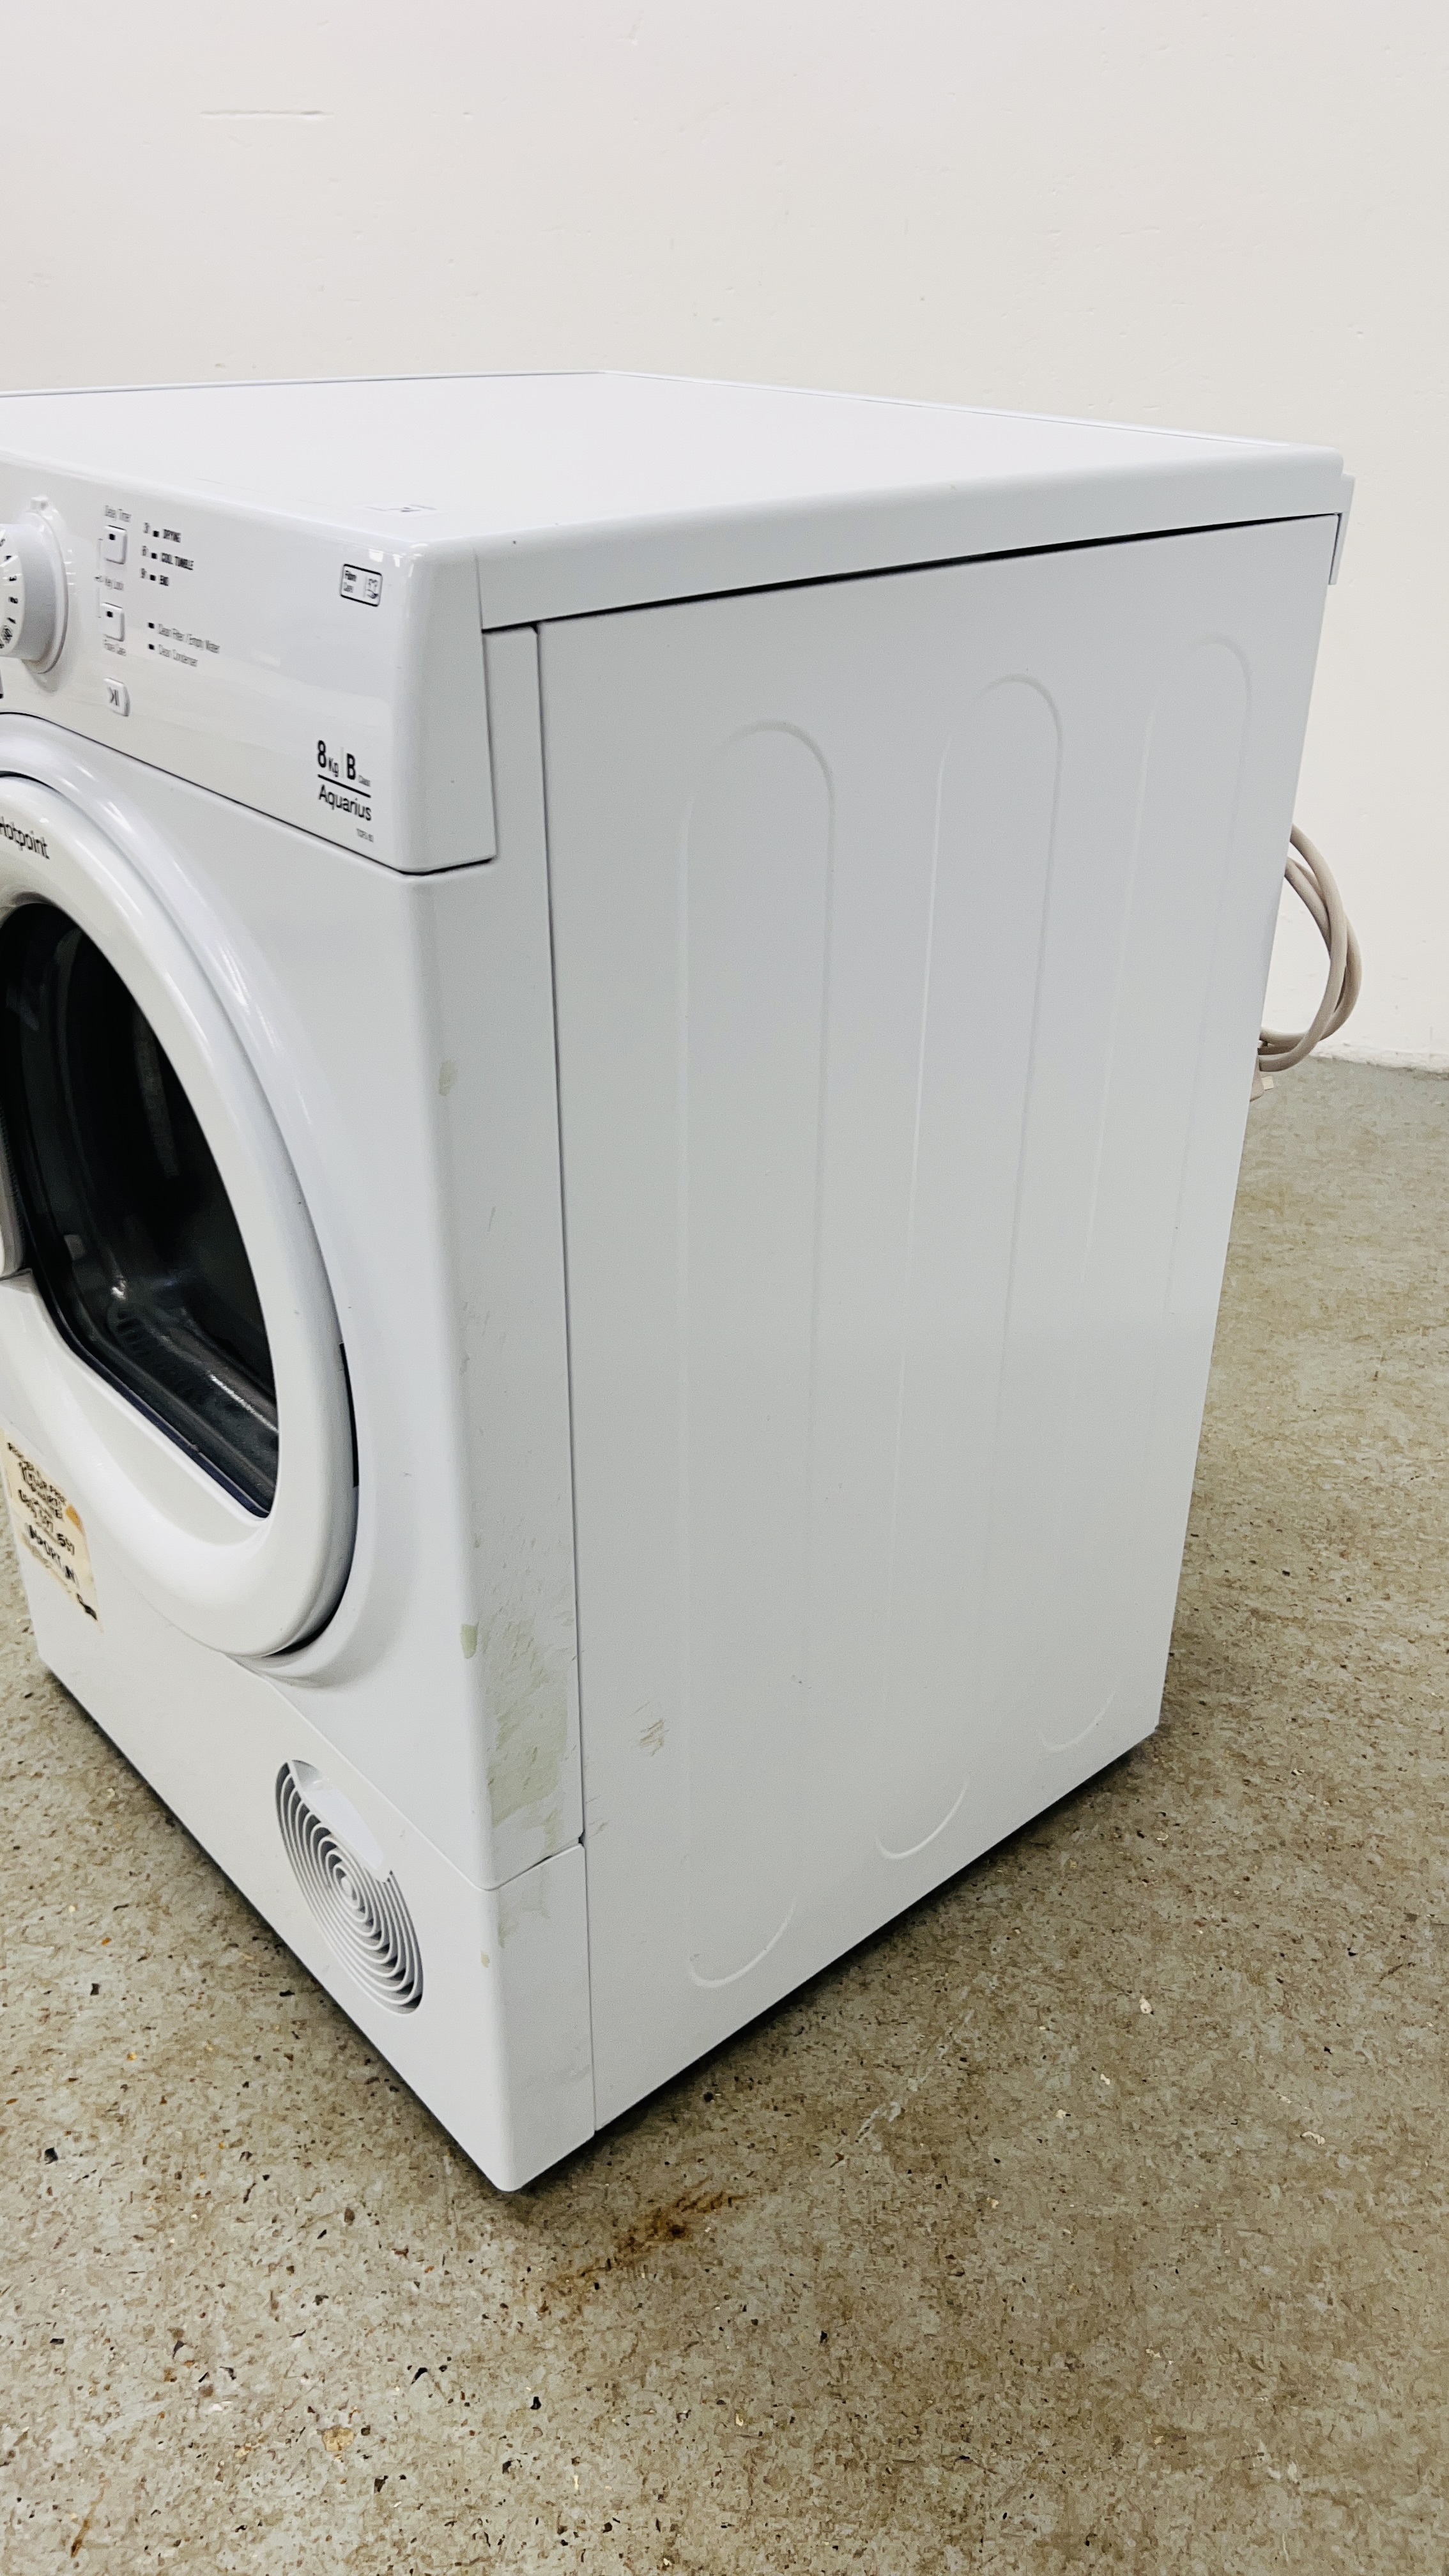 A HOTPOINT 8KG AQUARIUS CONDENSER TUMBLE DRYER - SOLD AS SEEN. - Image 6 of 7